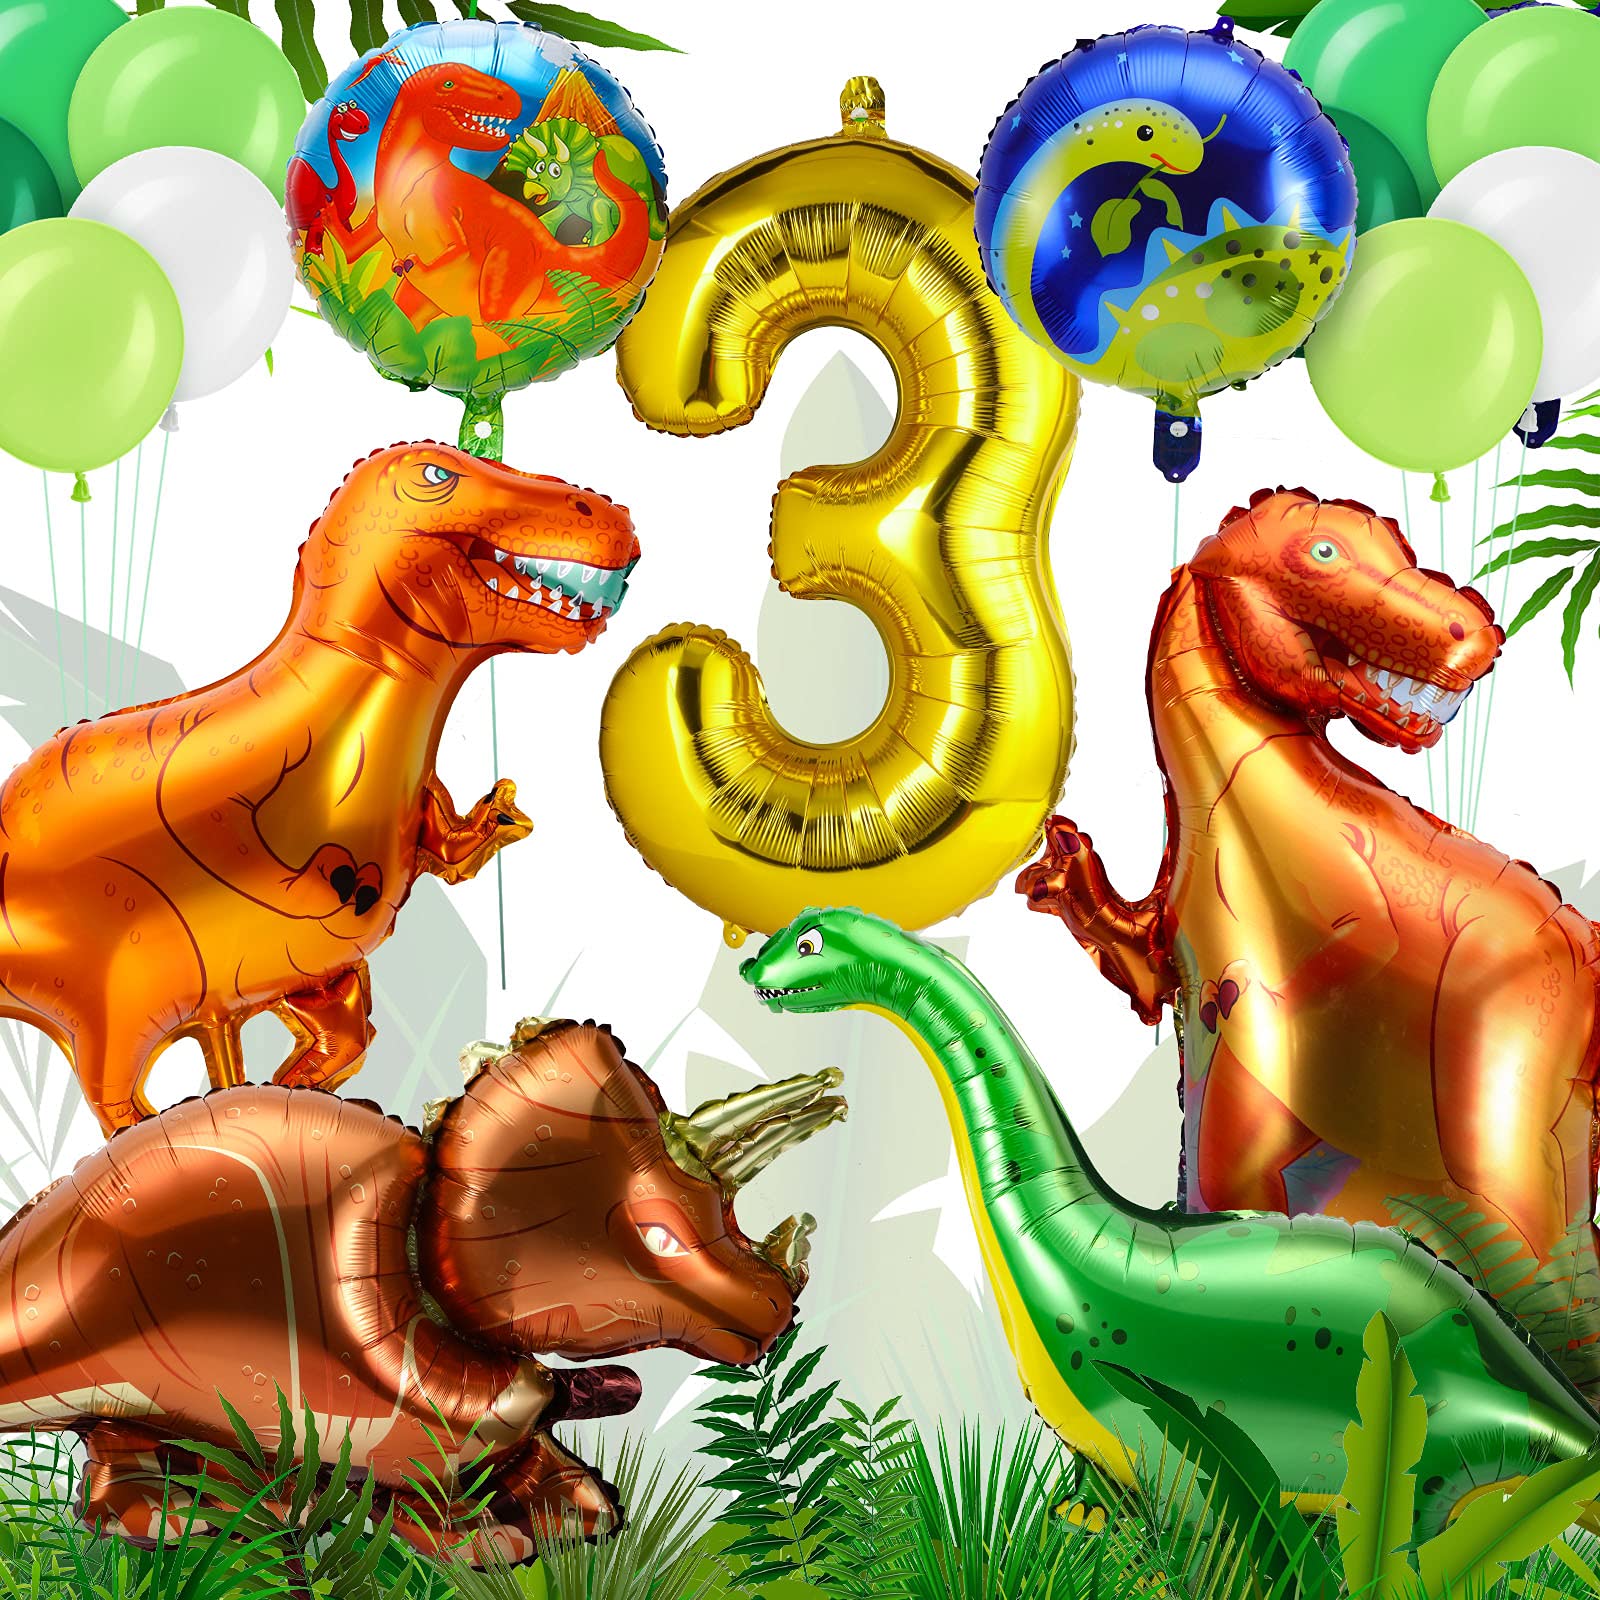 17 Pieces Dinosaur Balloons Dinosaur Party Balloons Dino Foil Aluminum Helium Balloons Giant Dinosaur Party Supplies for Birthday Baby Shower Jungle Theme Party Decorations (3rd Birthday)